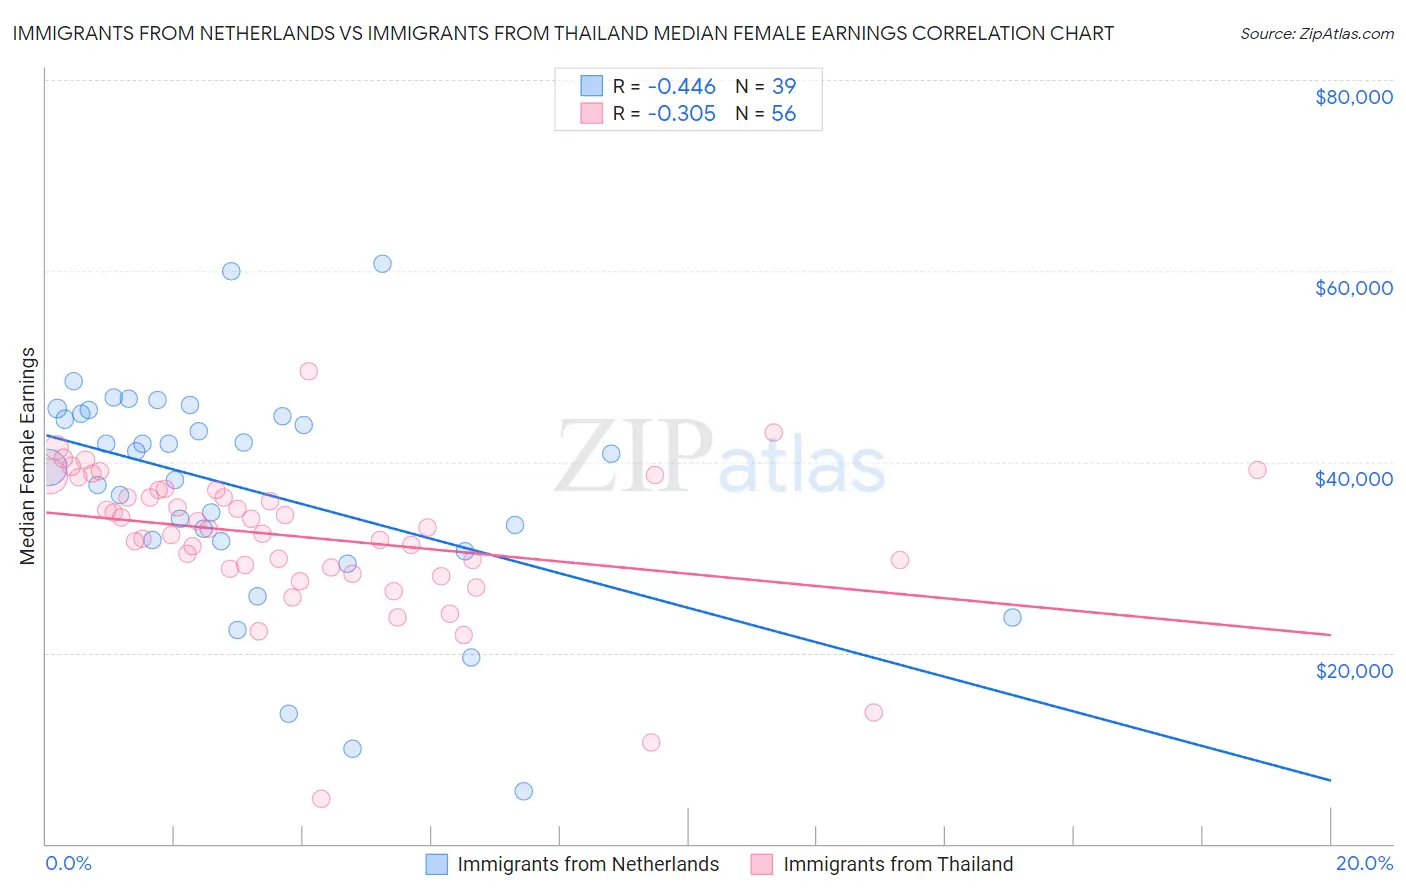 Immigrants from Netherlands vs Immigrants from Thailand Median Female Earnings